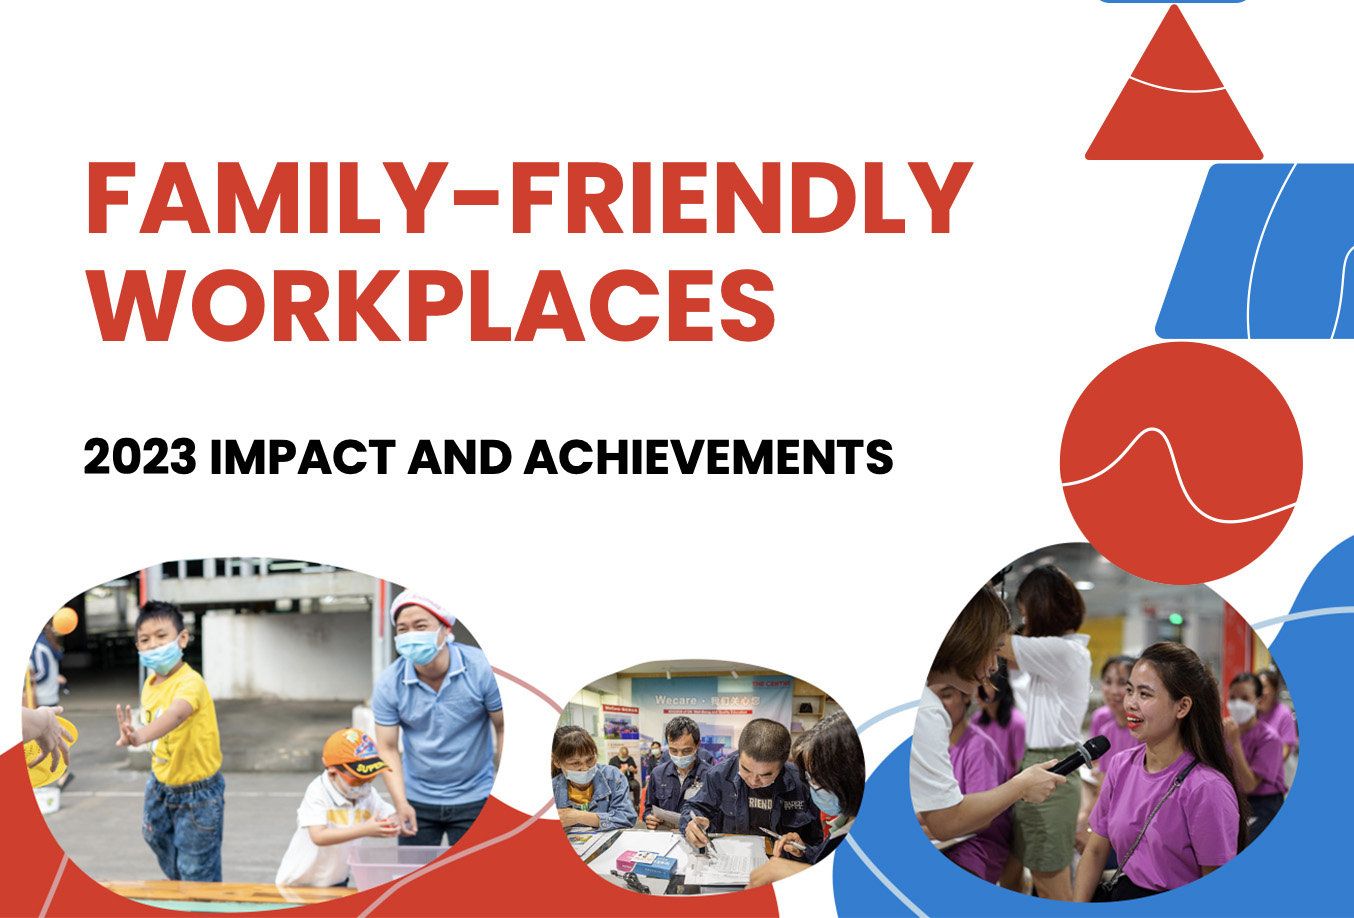 Family-Friendly Workplaces - 2023 Impact and Achievements